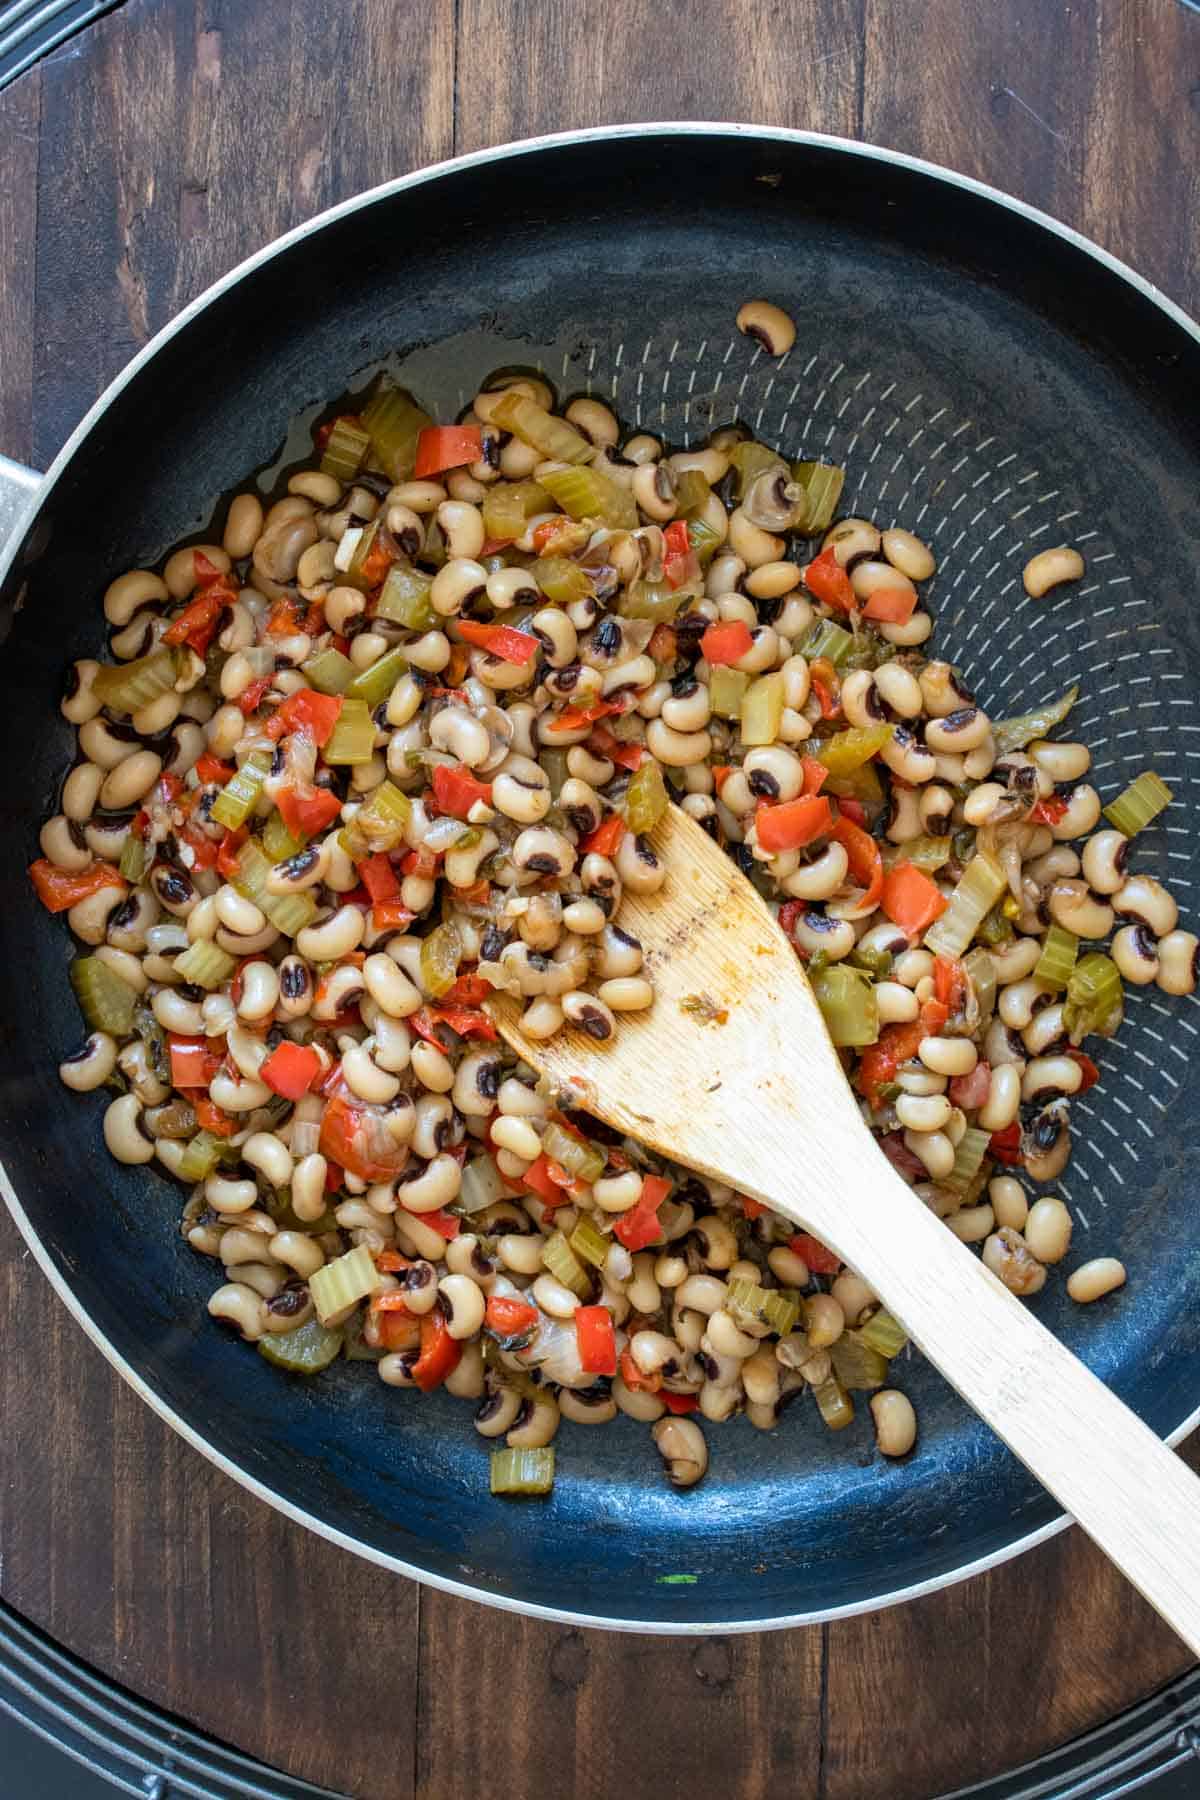 Sautéed veggies and black eyed peas being stirred by a wooden spoon